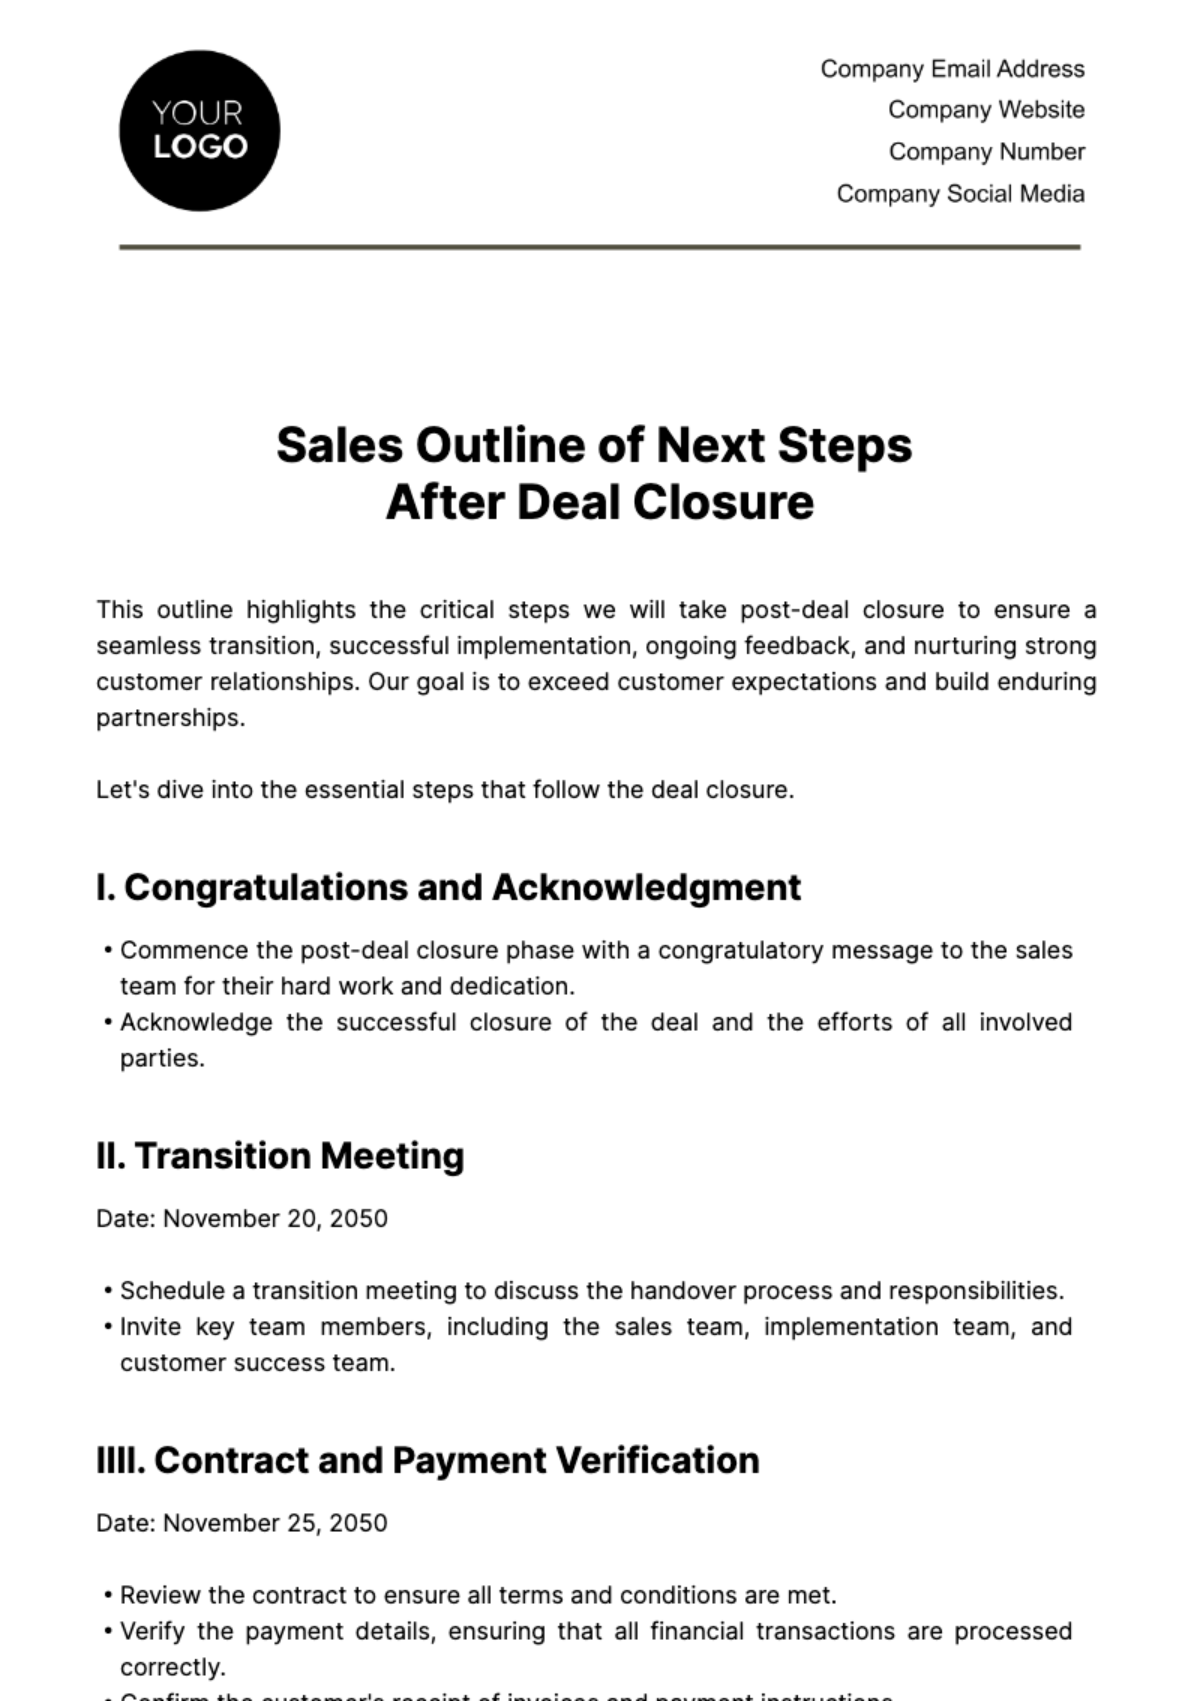 Sales Outline of Next Steps after Deal Closure Template